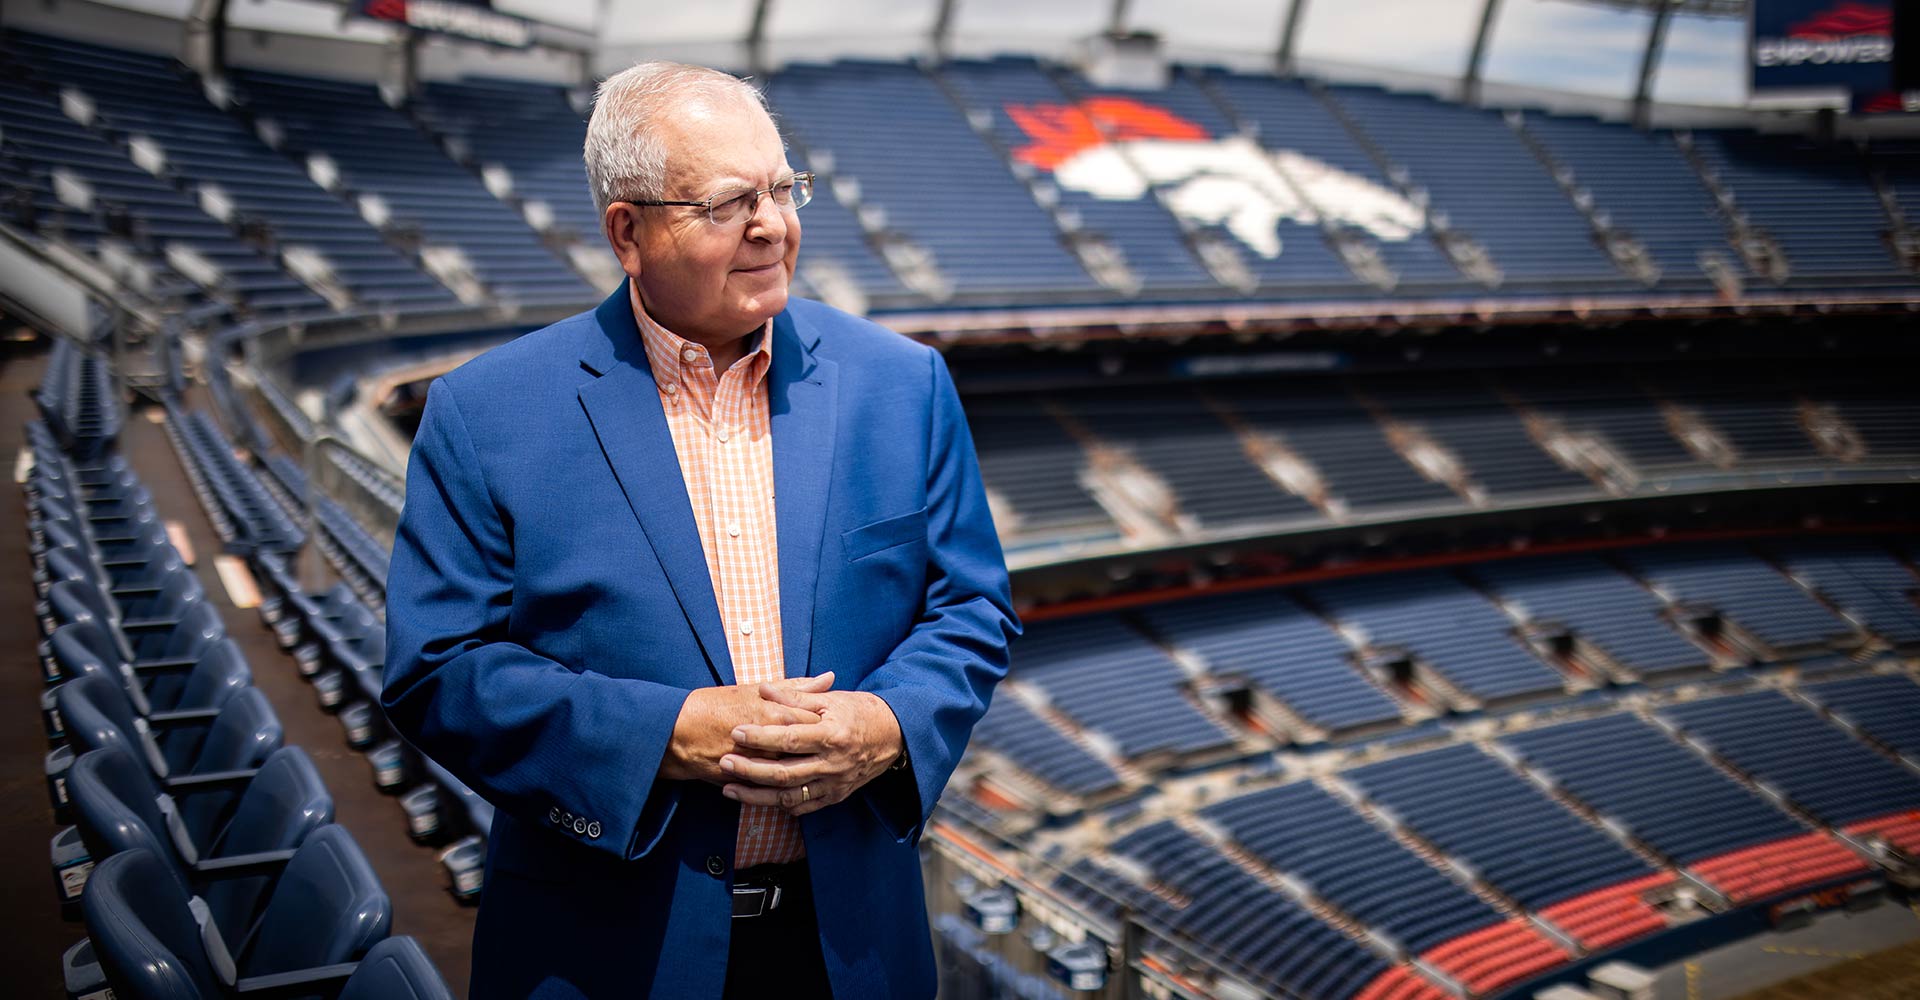 Broncos PR legend reflects on a storied career and a new era for Denver football